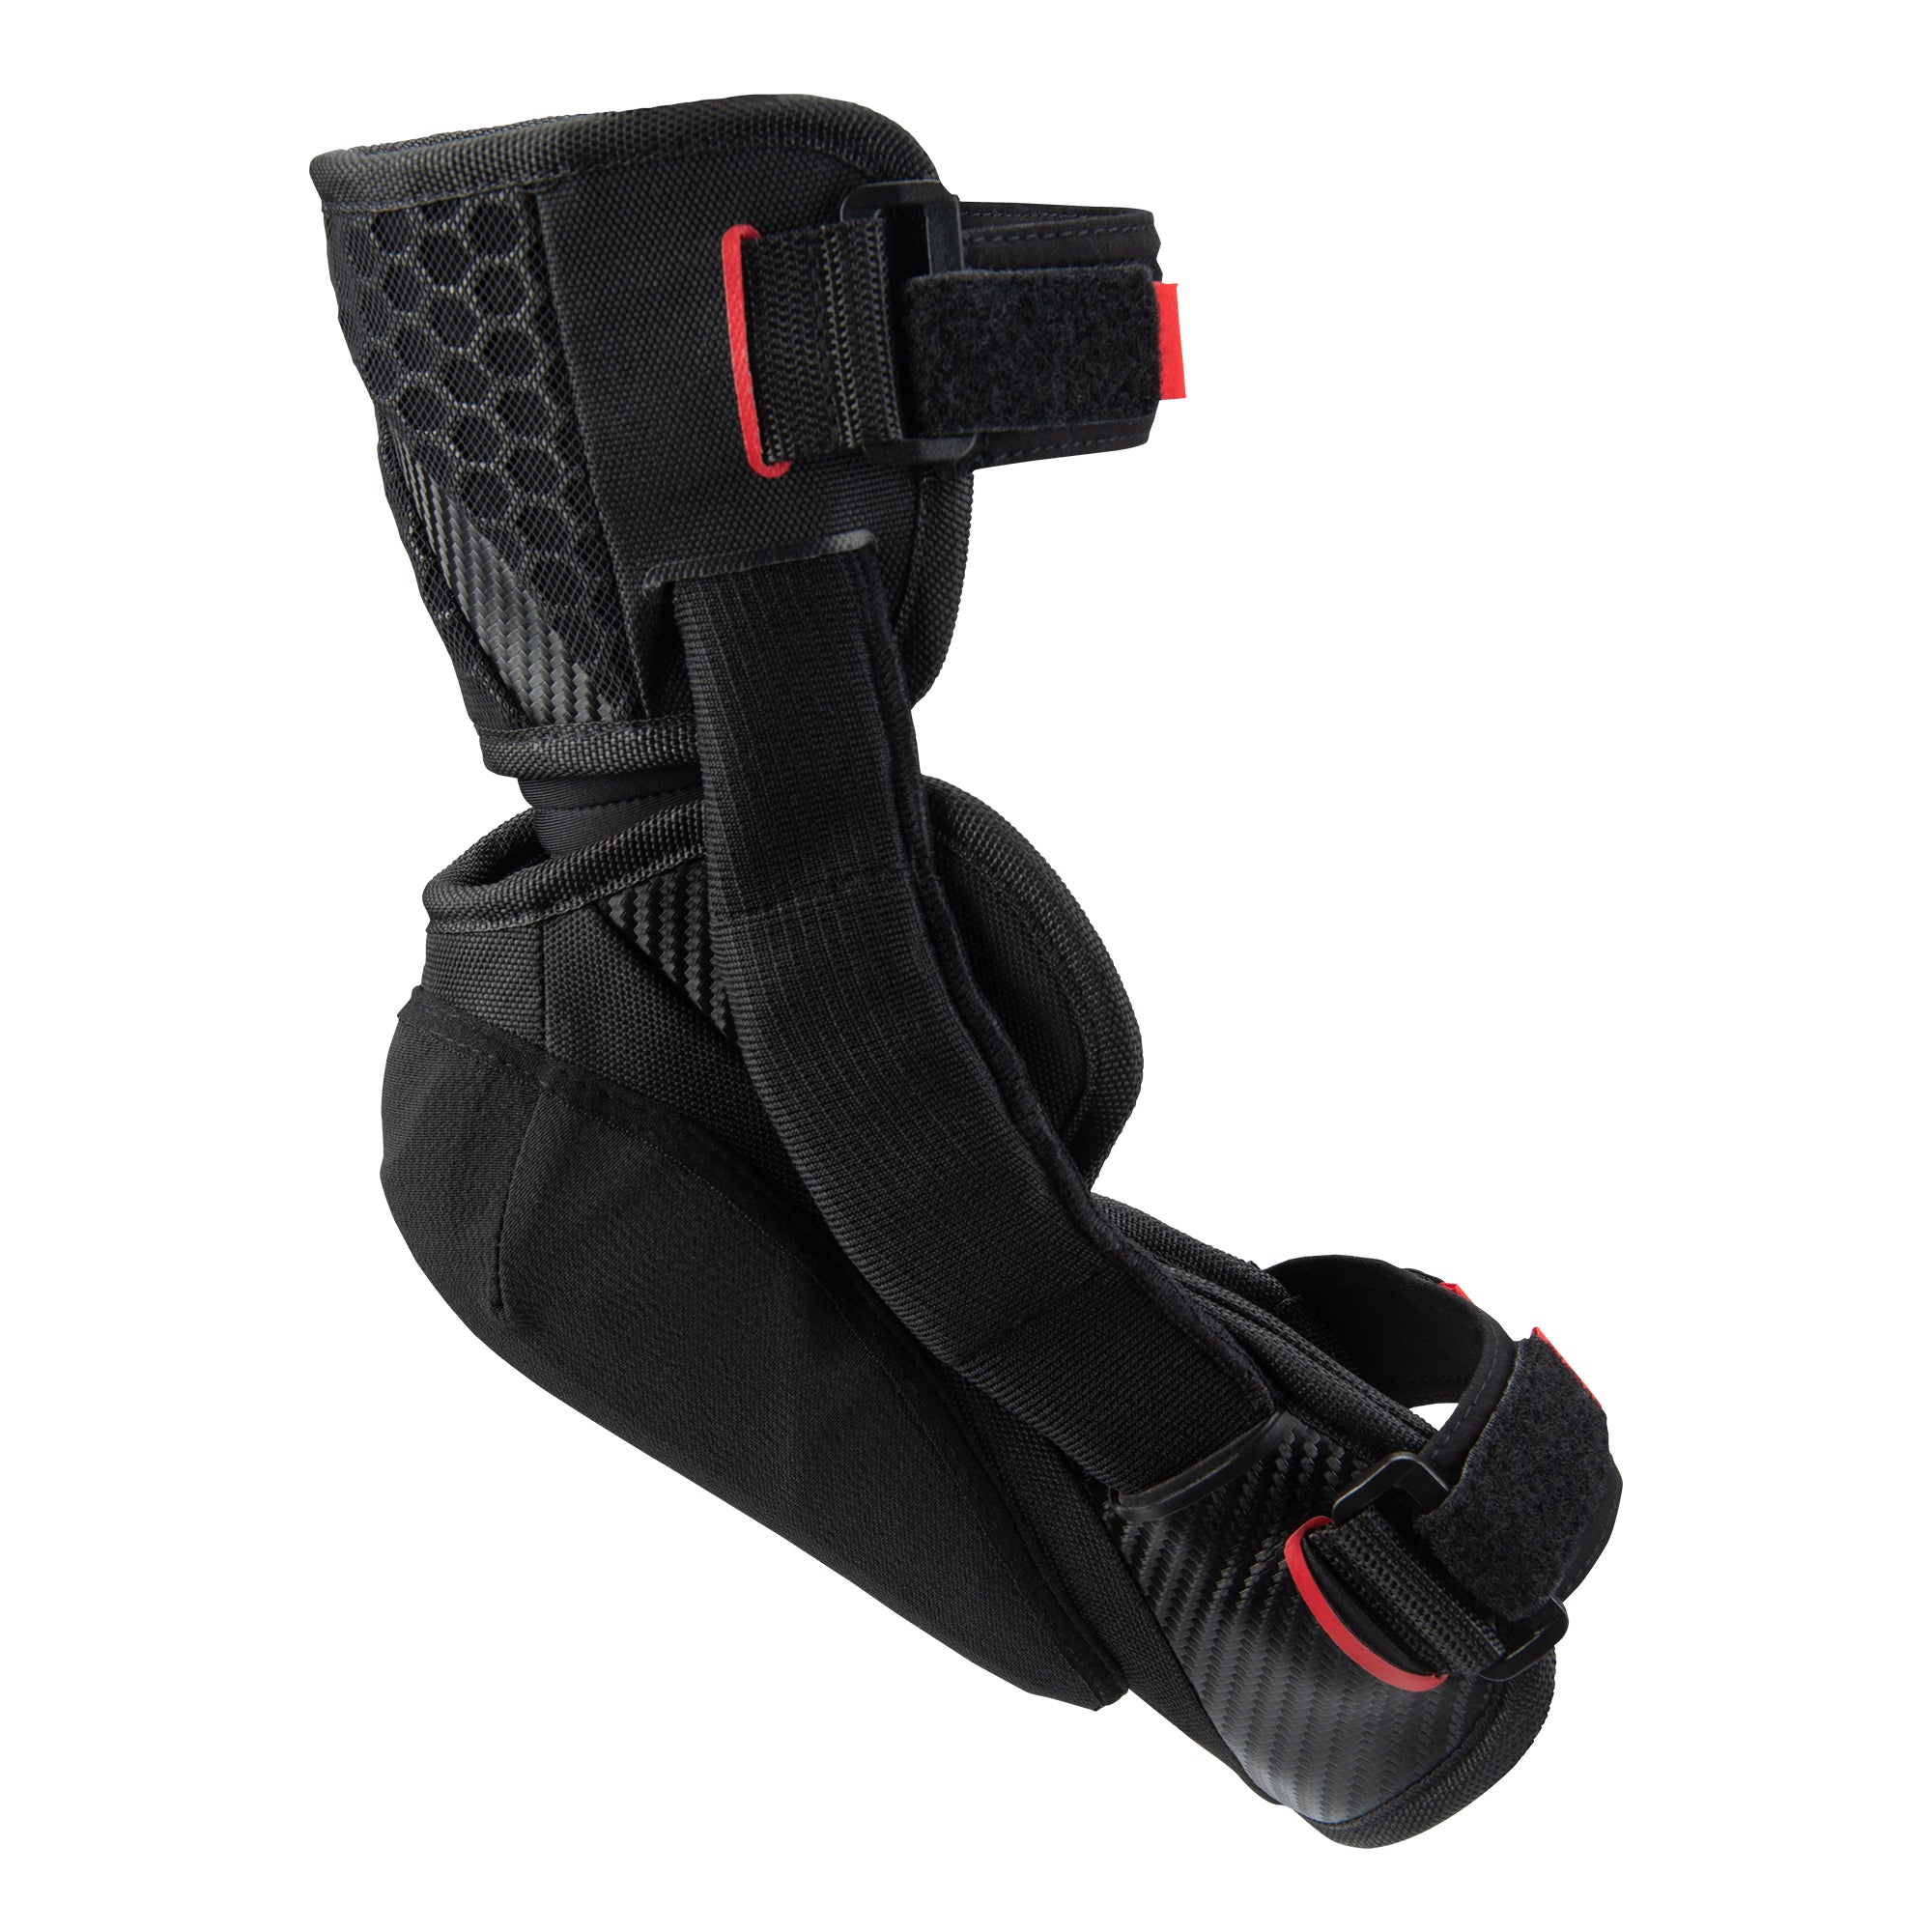 Knee Brace with Polycentric Hinges & Cross Straps